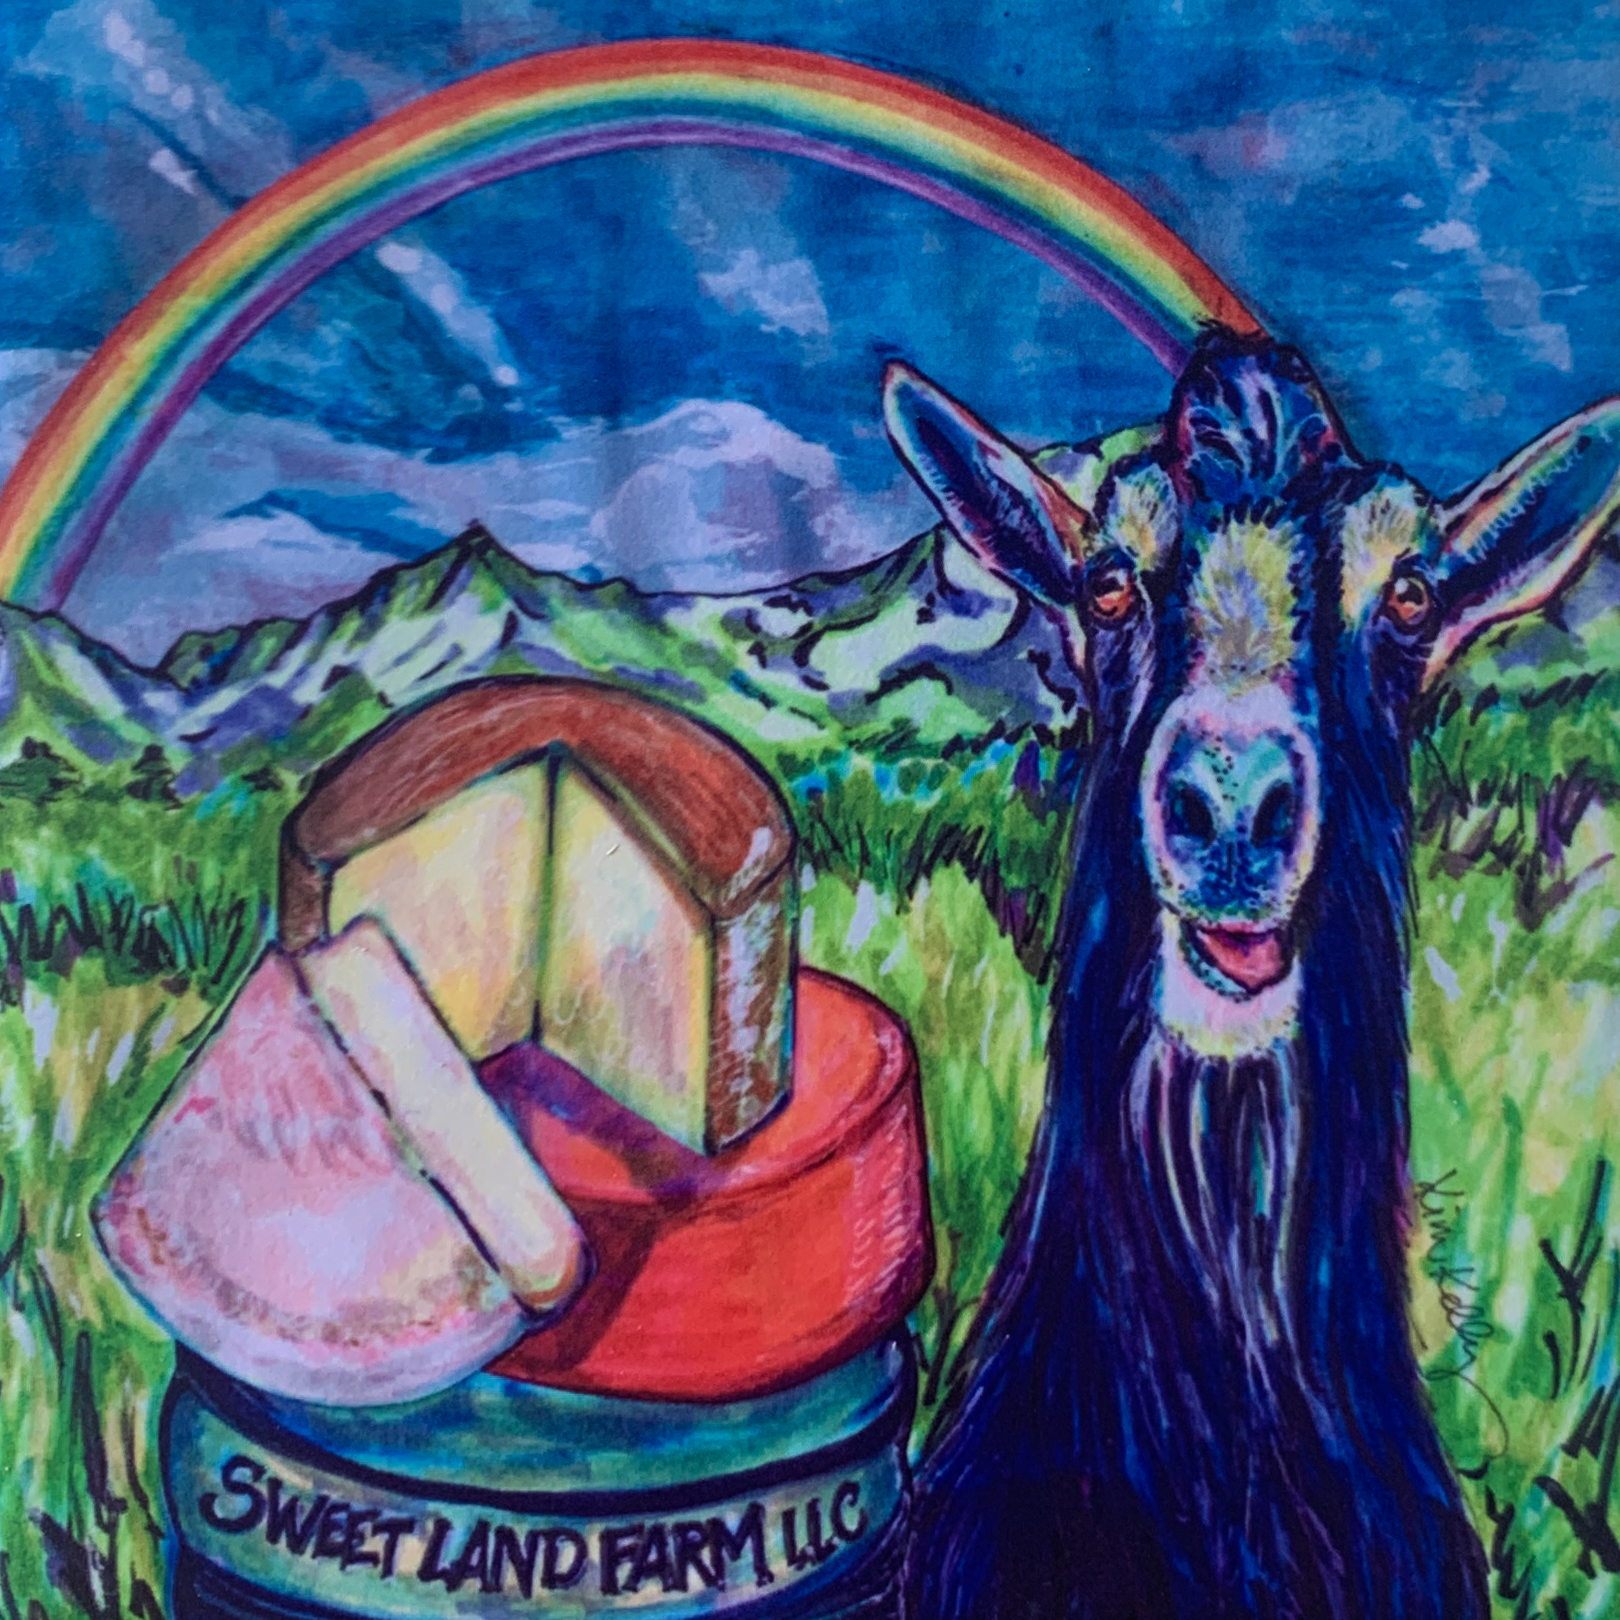 vibrant and brightly colored hand painted tile featuring a smiling goat and a stack of cheese on a barrel with blue sky and a rainbow in the background